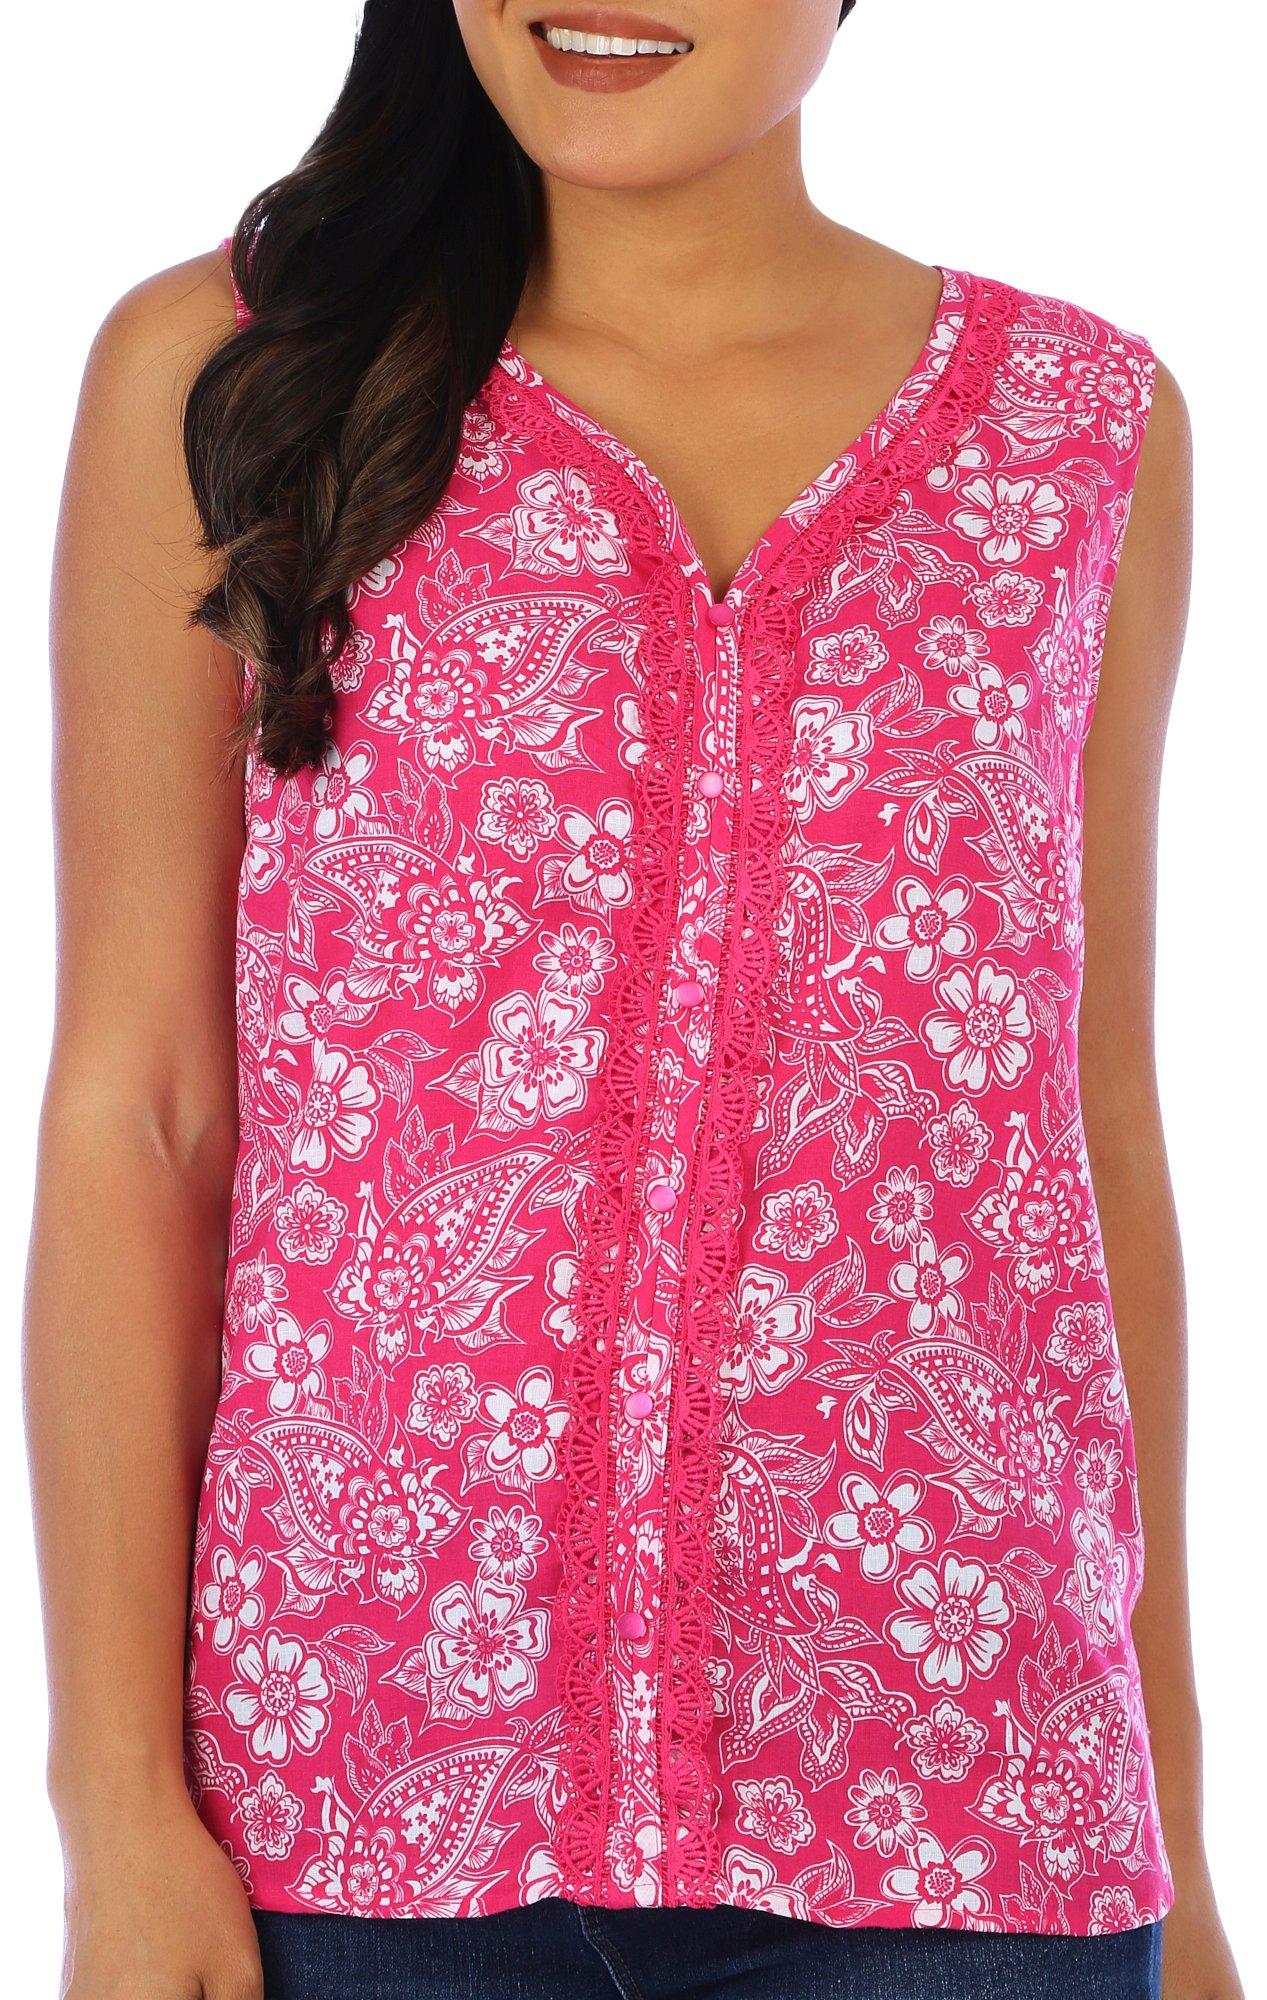 Coral Bay Womens Floral Print Button Down Sleeveless